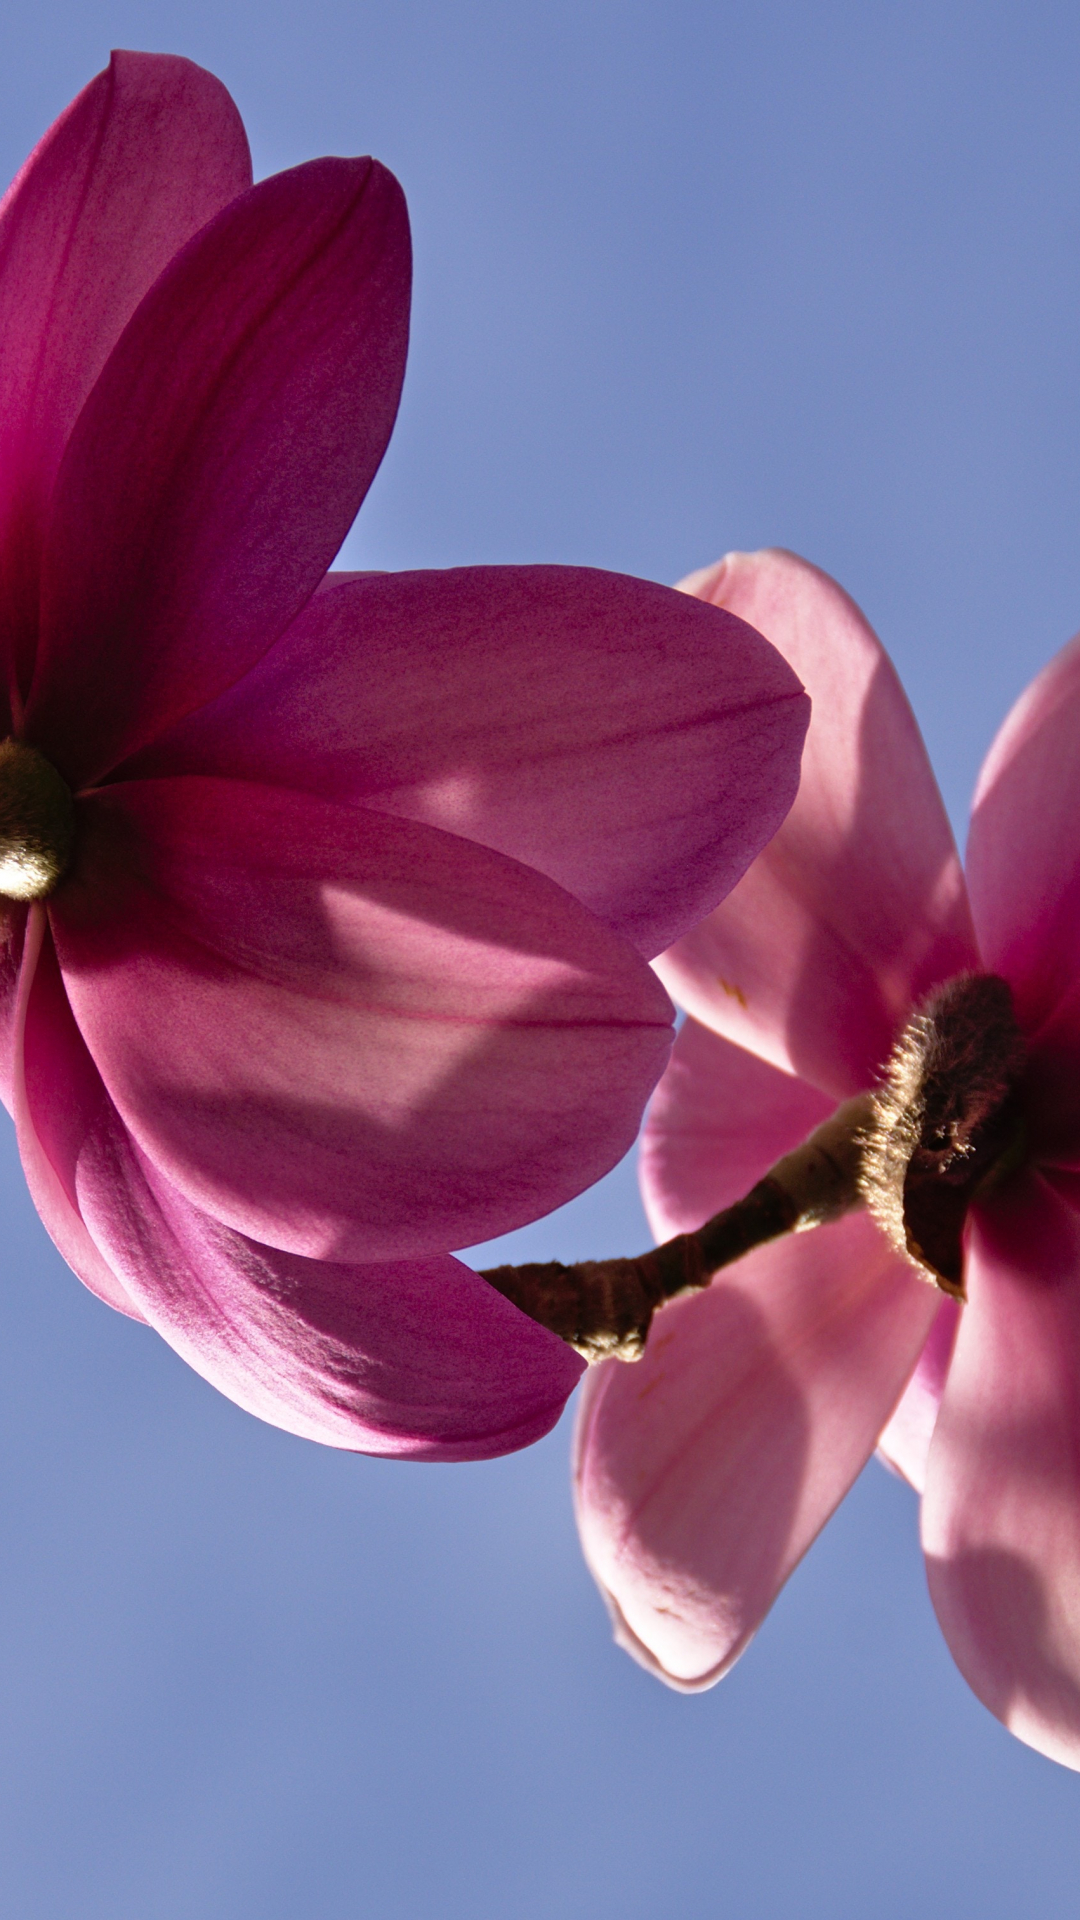 Spring And Plant Iphone Wallpaper - Chinese Magnolia , HD Wallpaper & Backgrounds